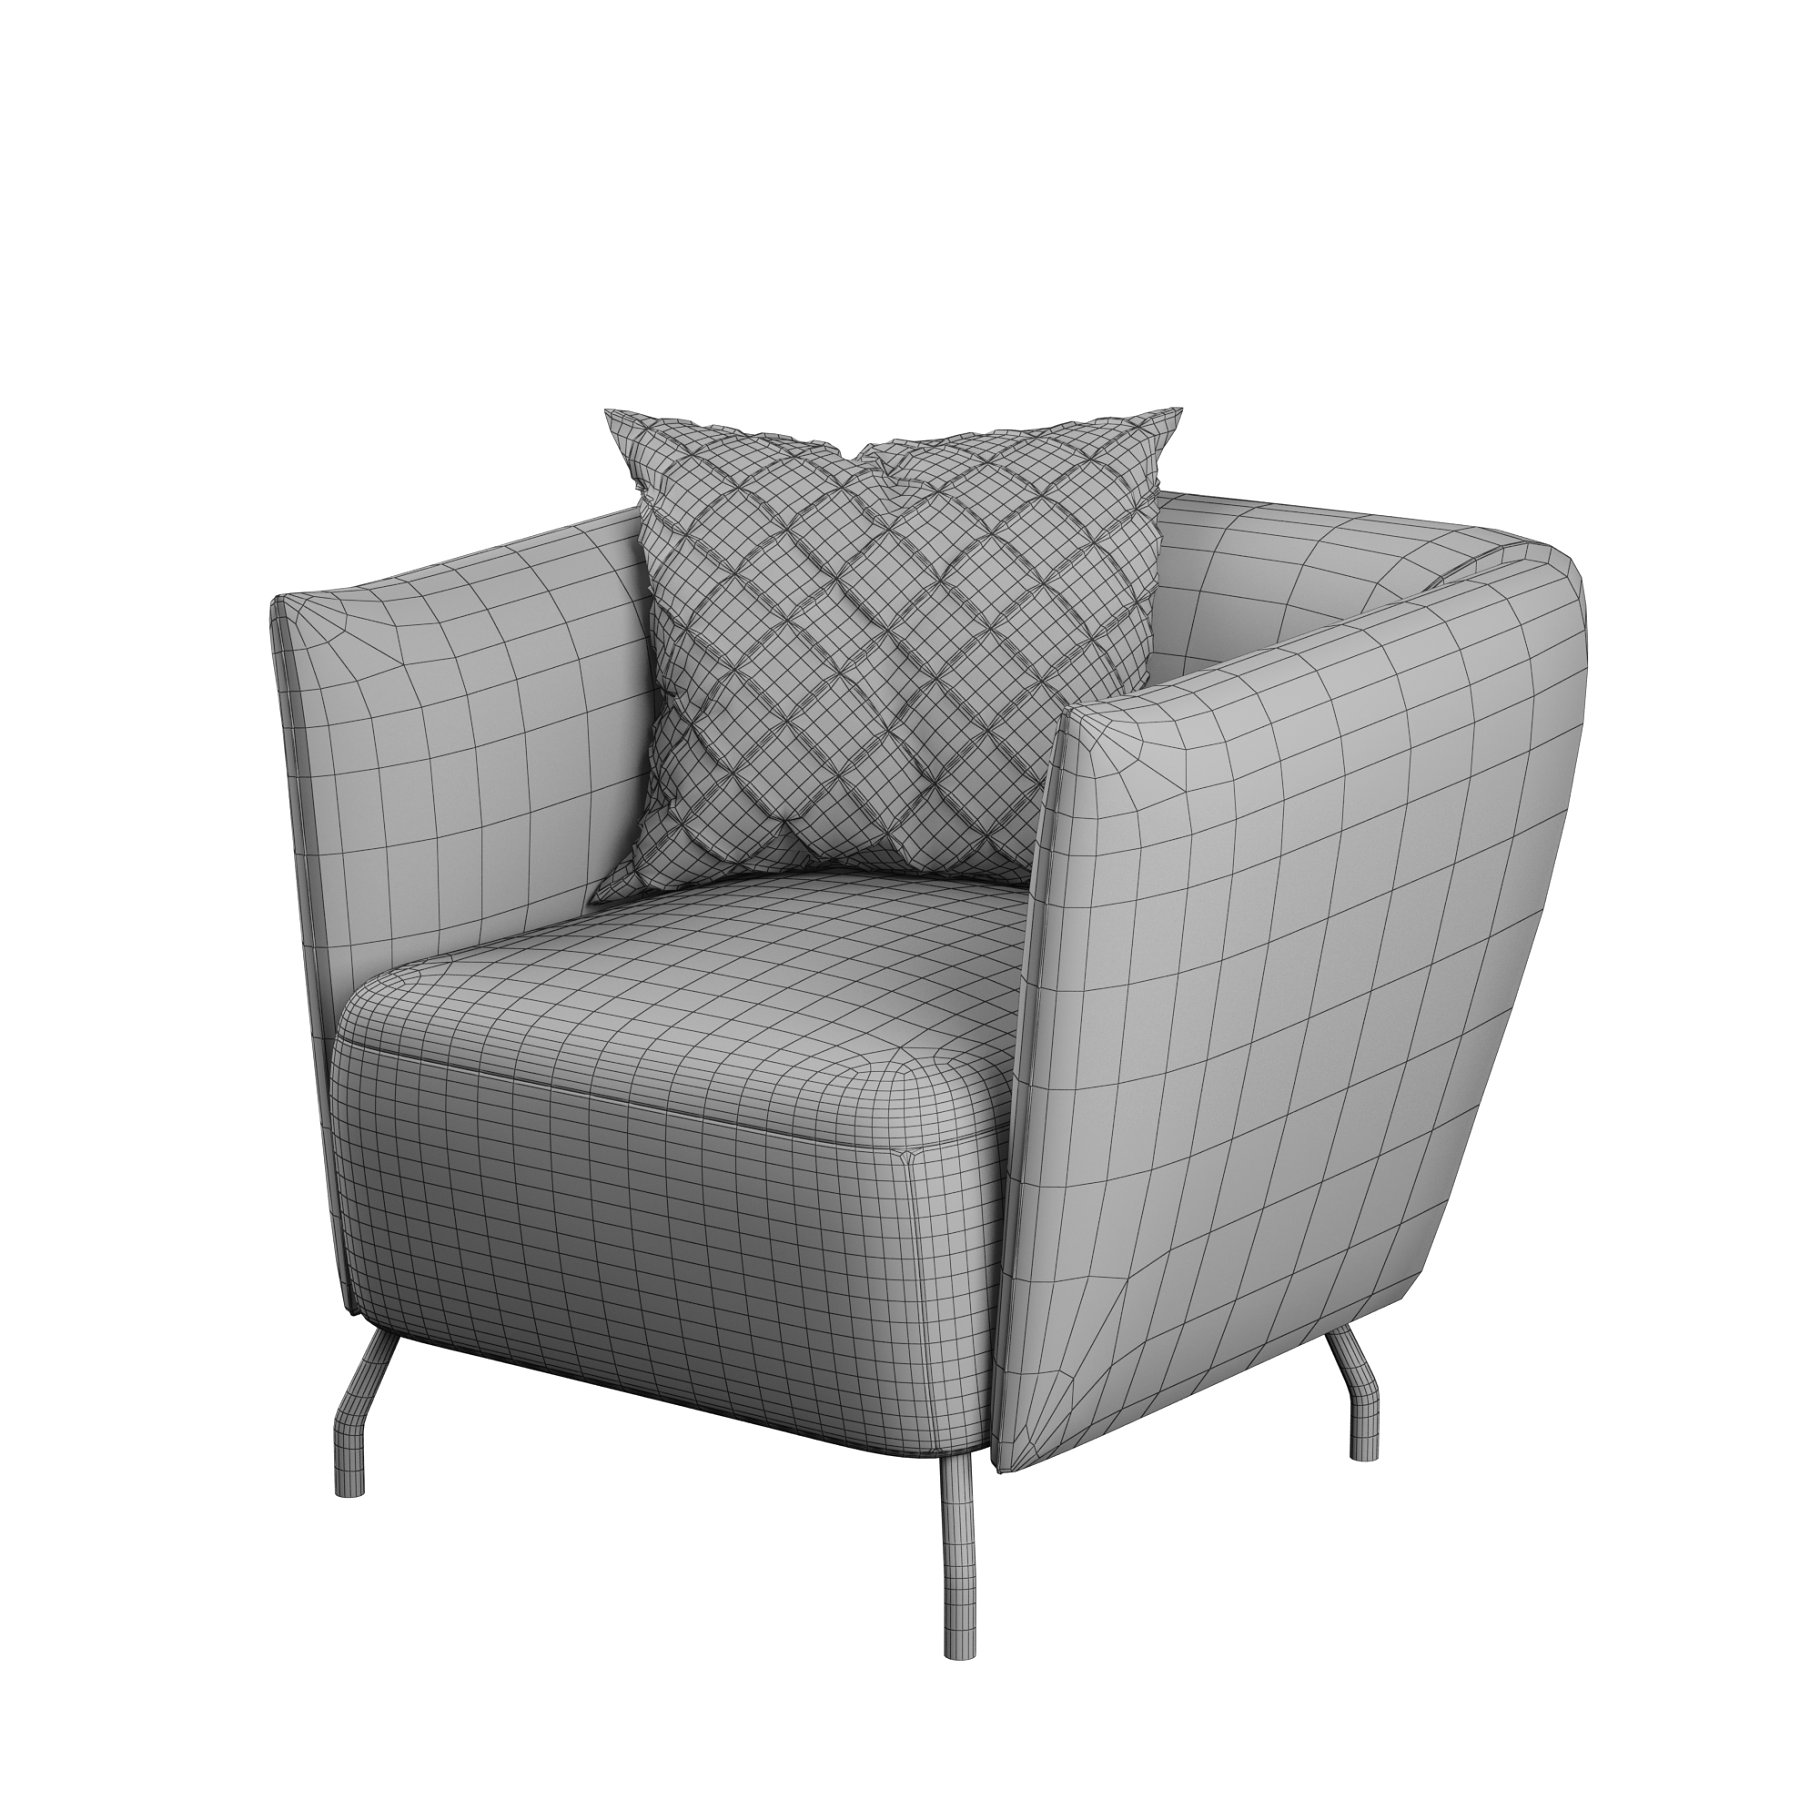 Rendering of an adorable armchair 3d model without textures